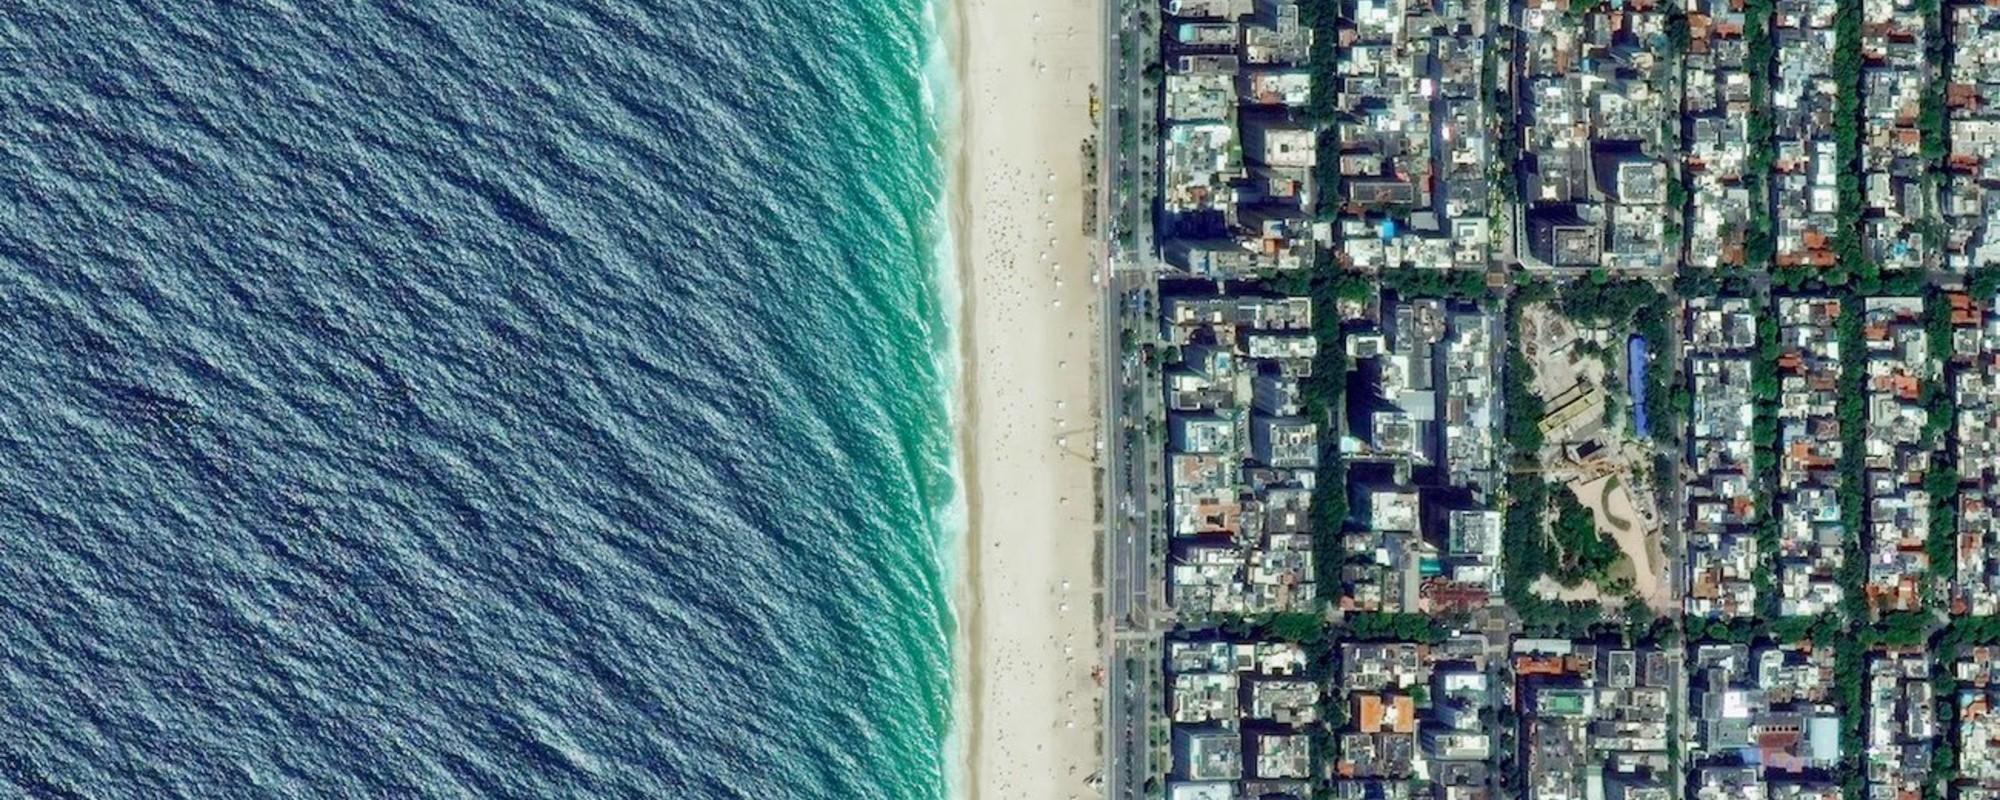 Photos Taken from Space to Make You Realize Just How Tiny We Are